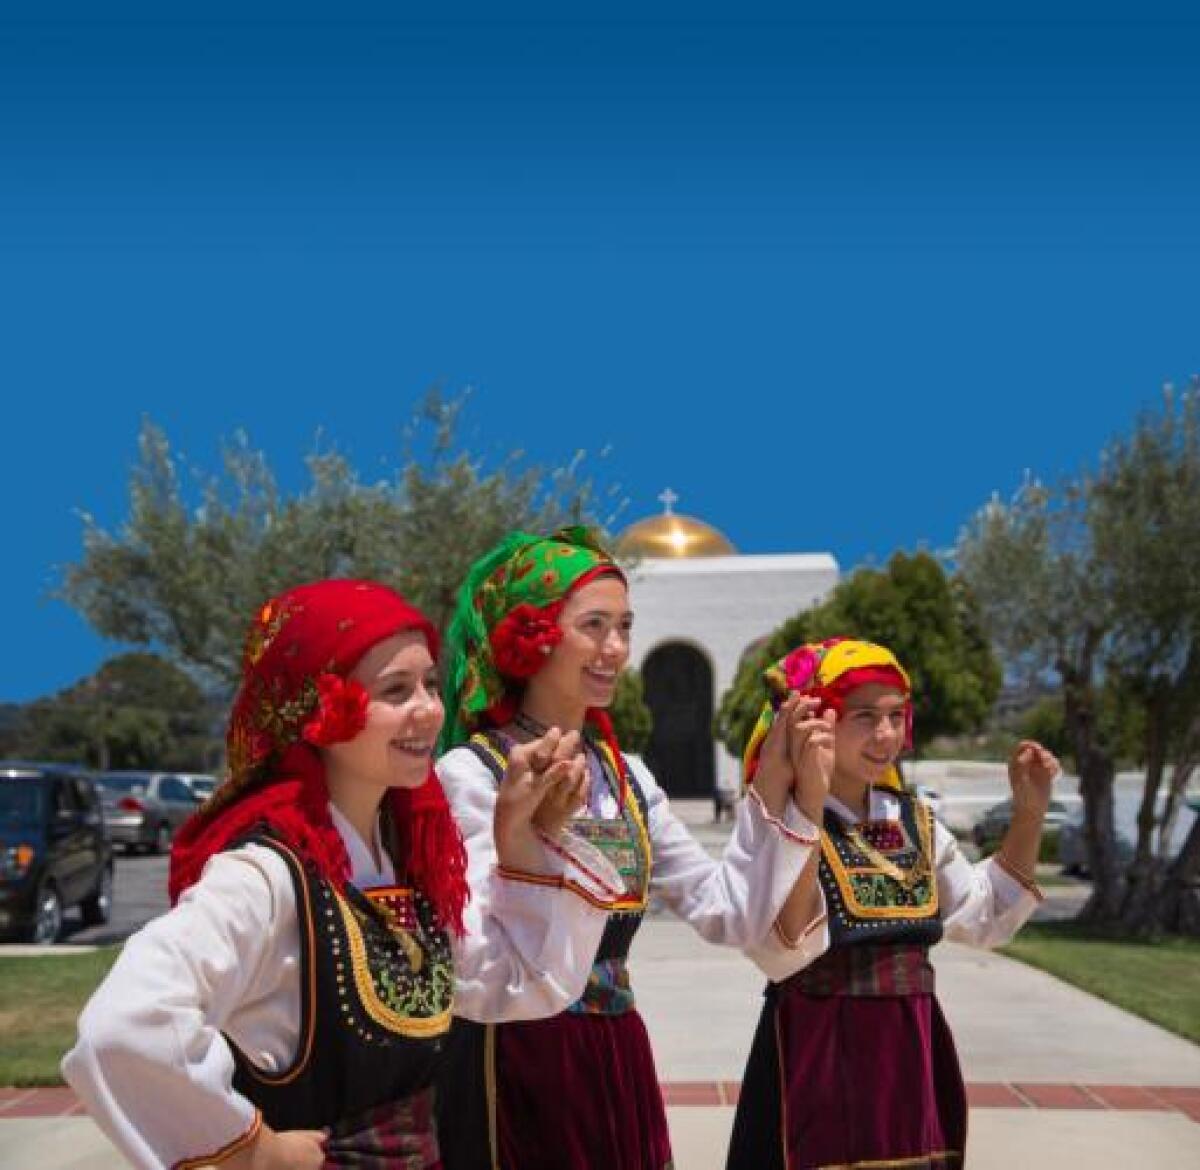 Greek folk dancing will be part of the festivities at the Annual Cardiff Greek Festival on Sept. 9-10.